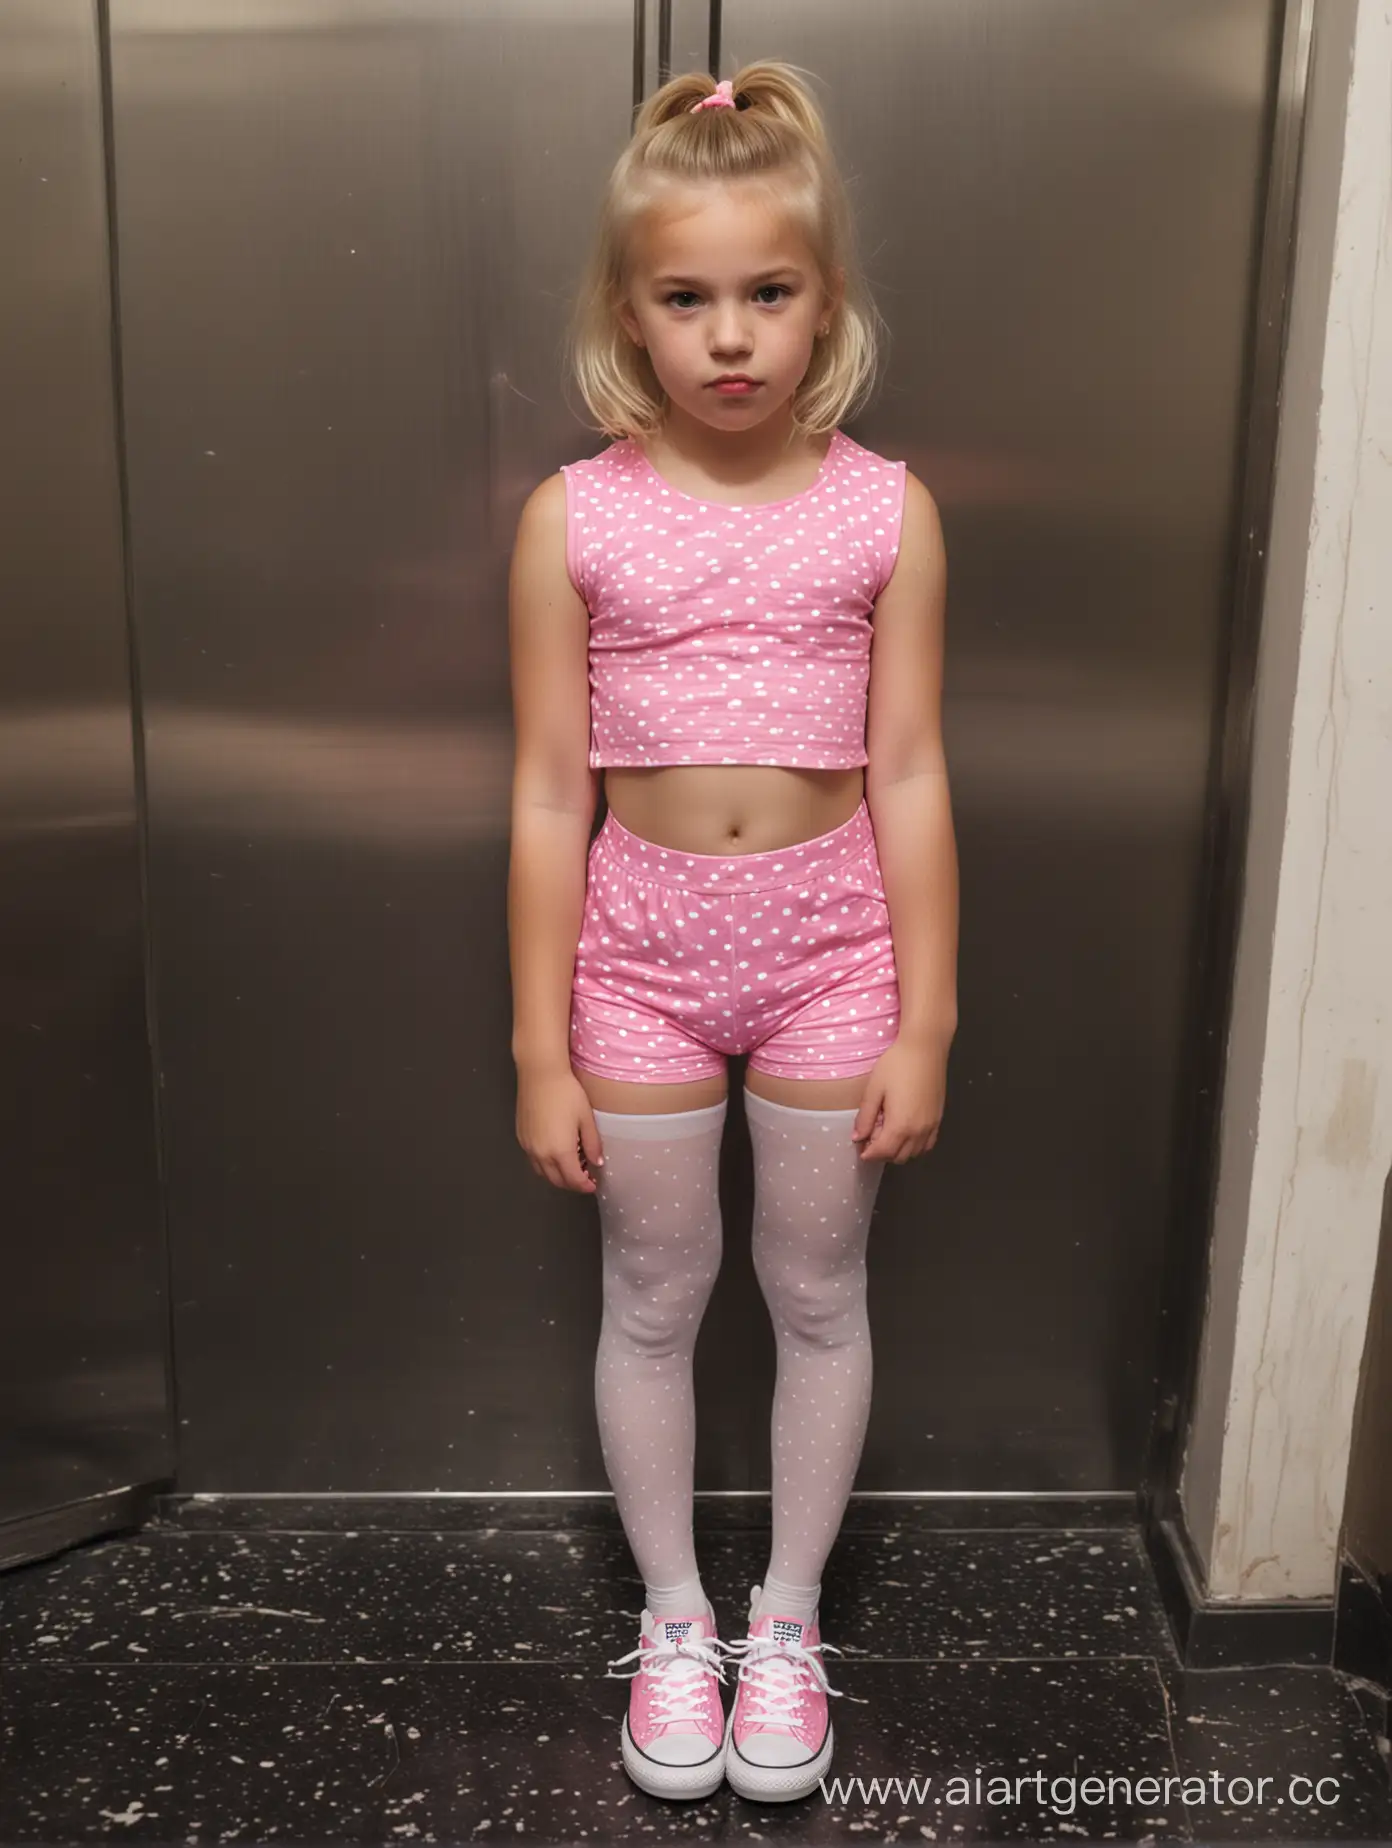 Lonely-Girl-in-Elevator-Portrait-of-a-Thoughtful-12YearOld